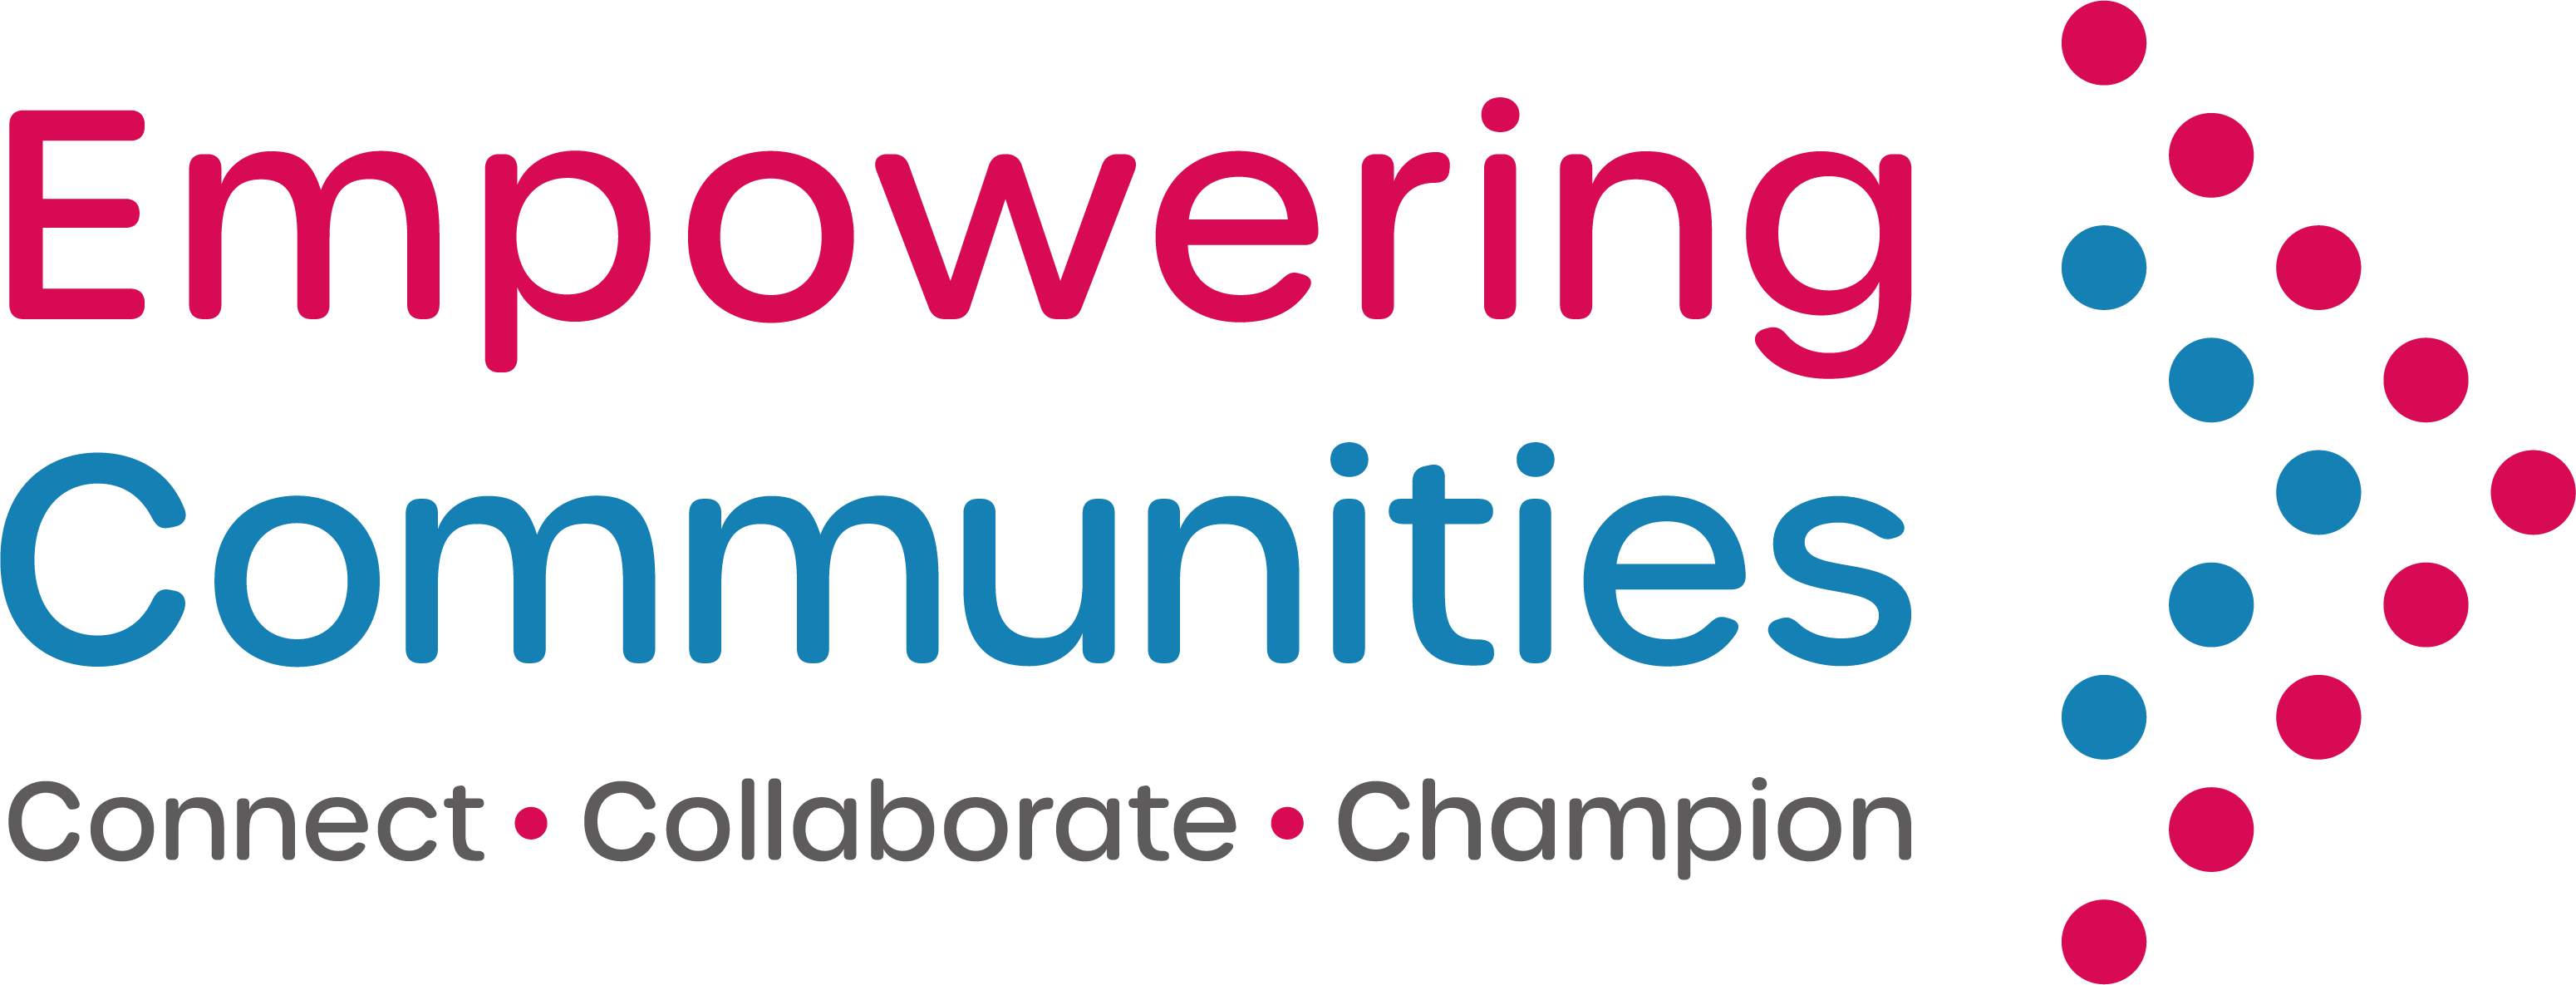 Empowering Communities - connect, collaborate, champion